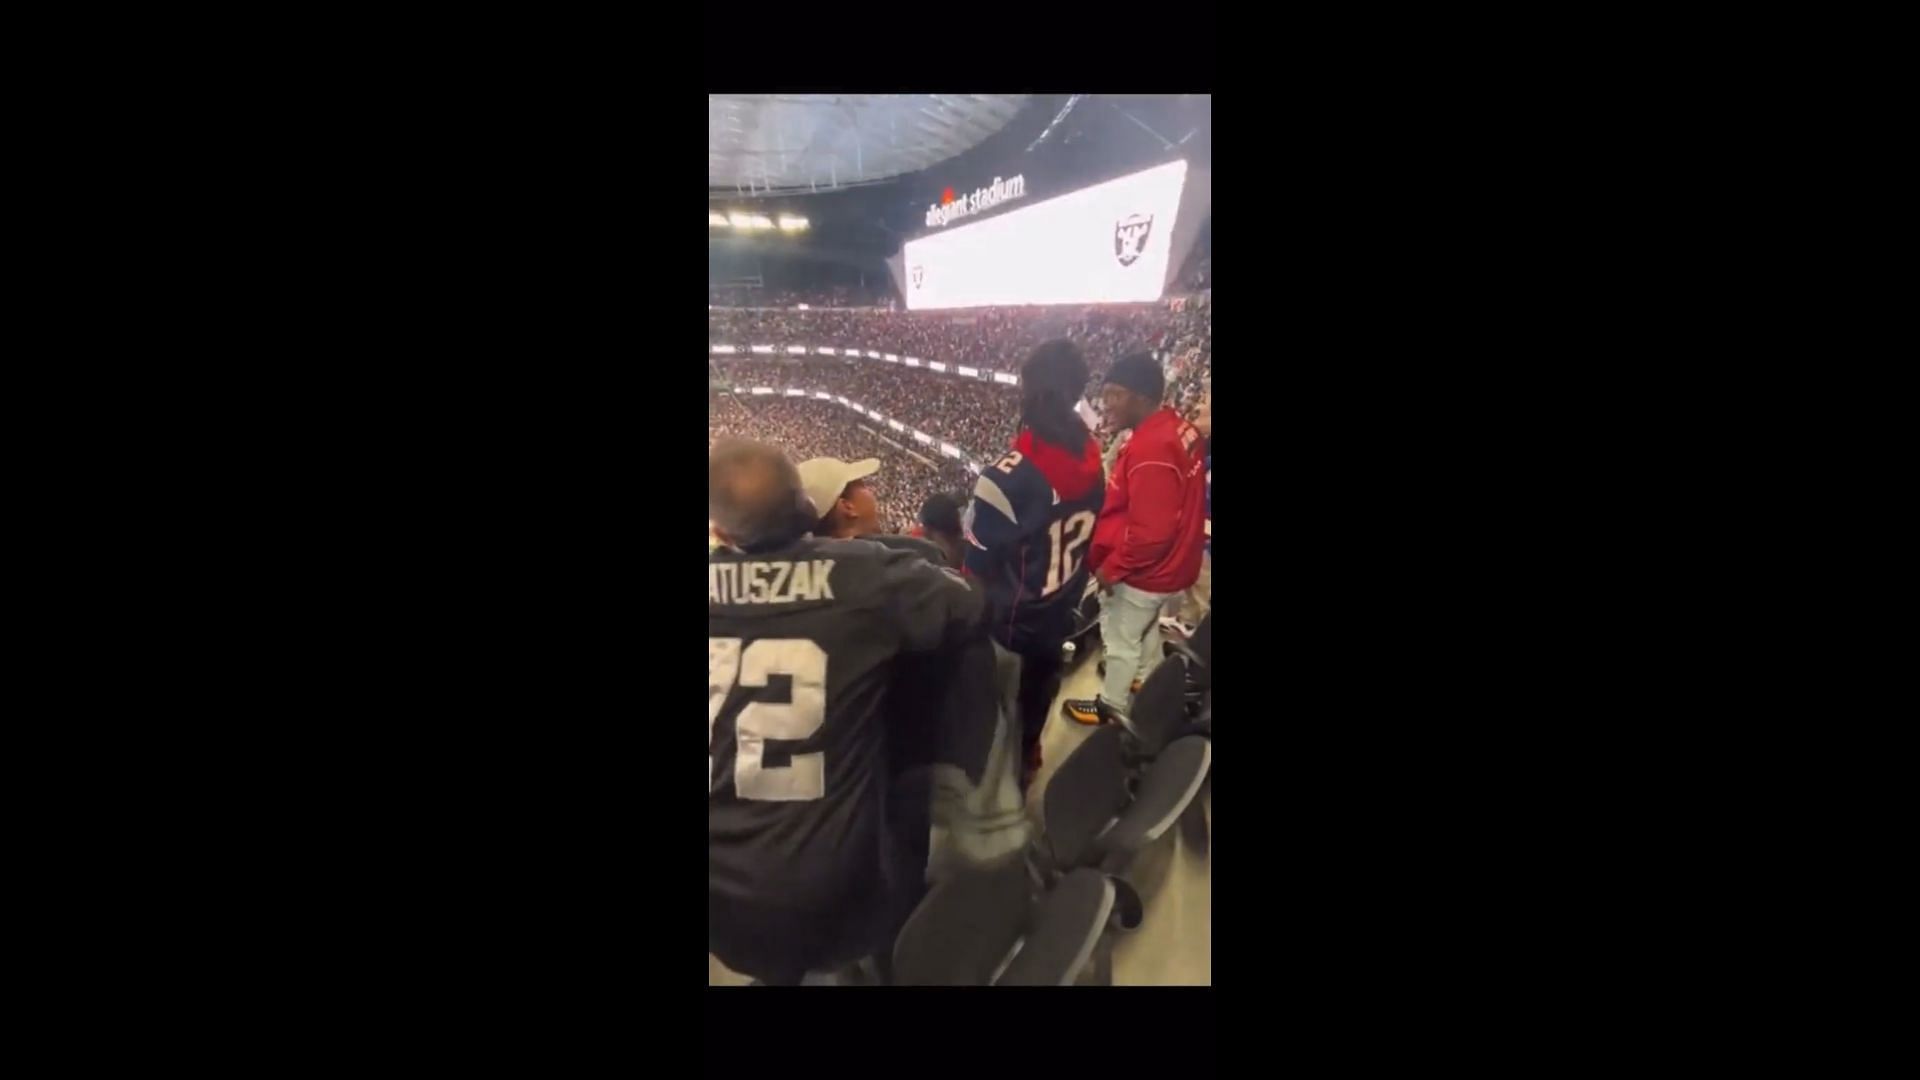 Patriots fan Jerry Edmund has gained fame after a video of him surfaced online